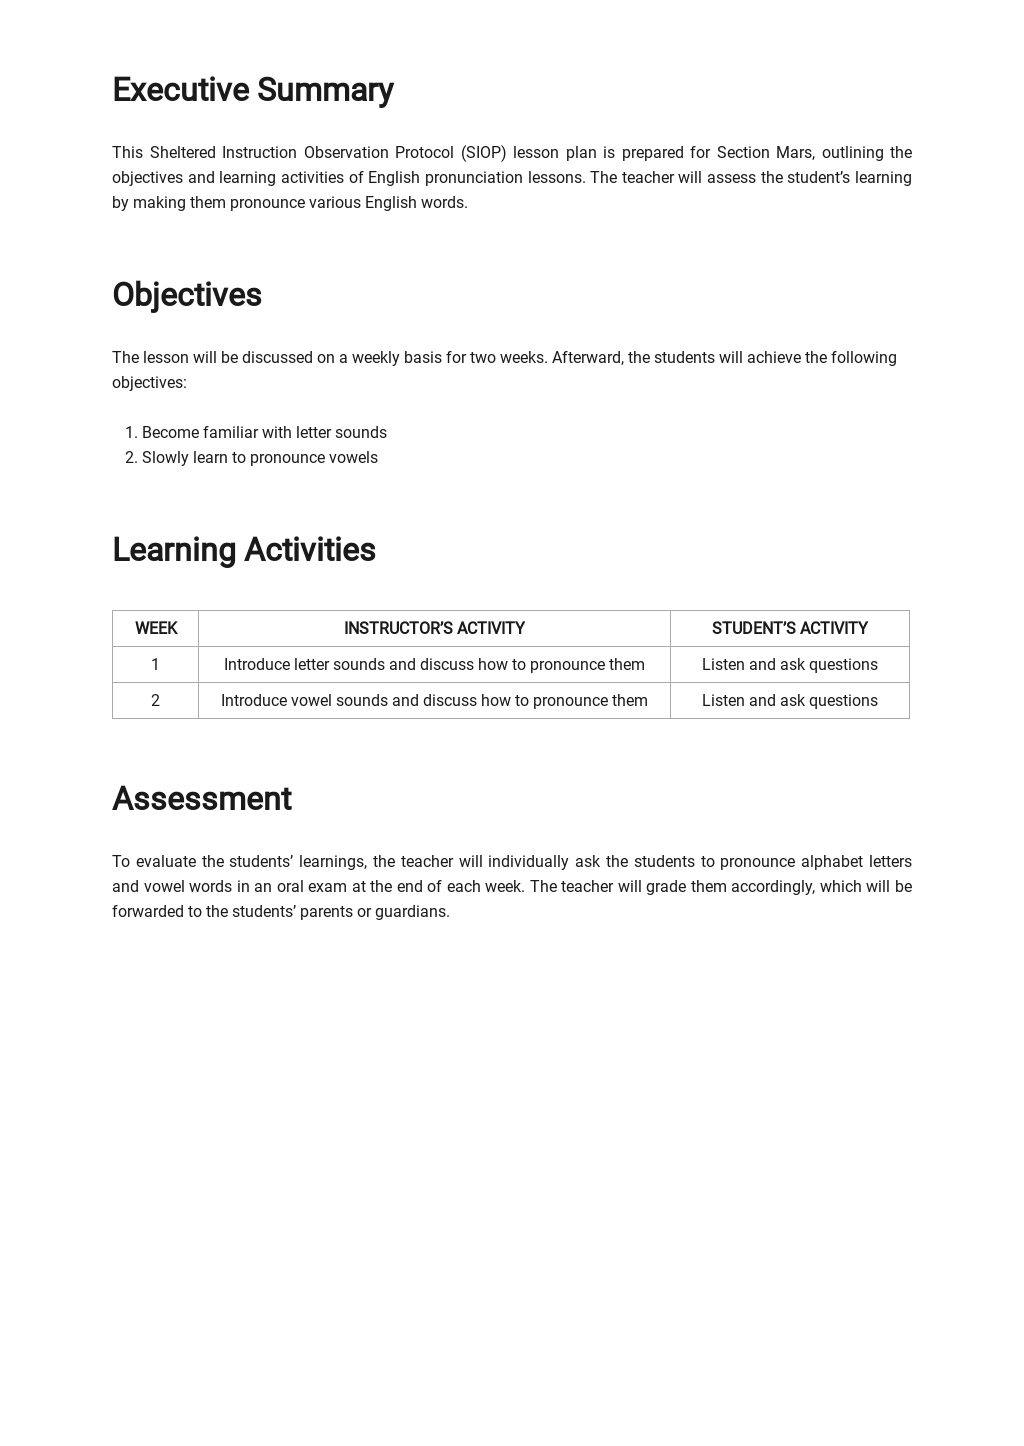 Weekly SIOP Lesson Plan Template 1.jpe